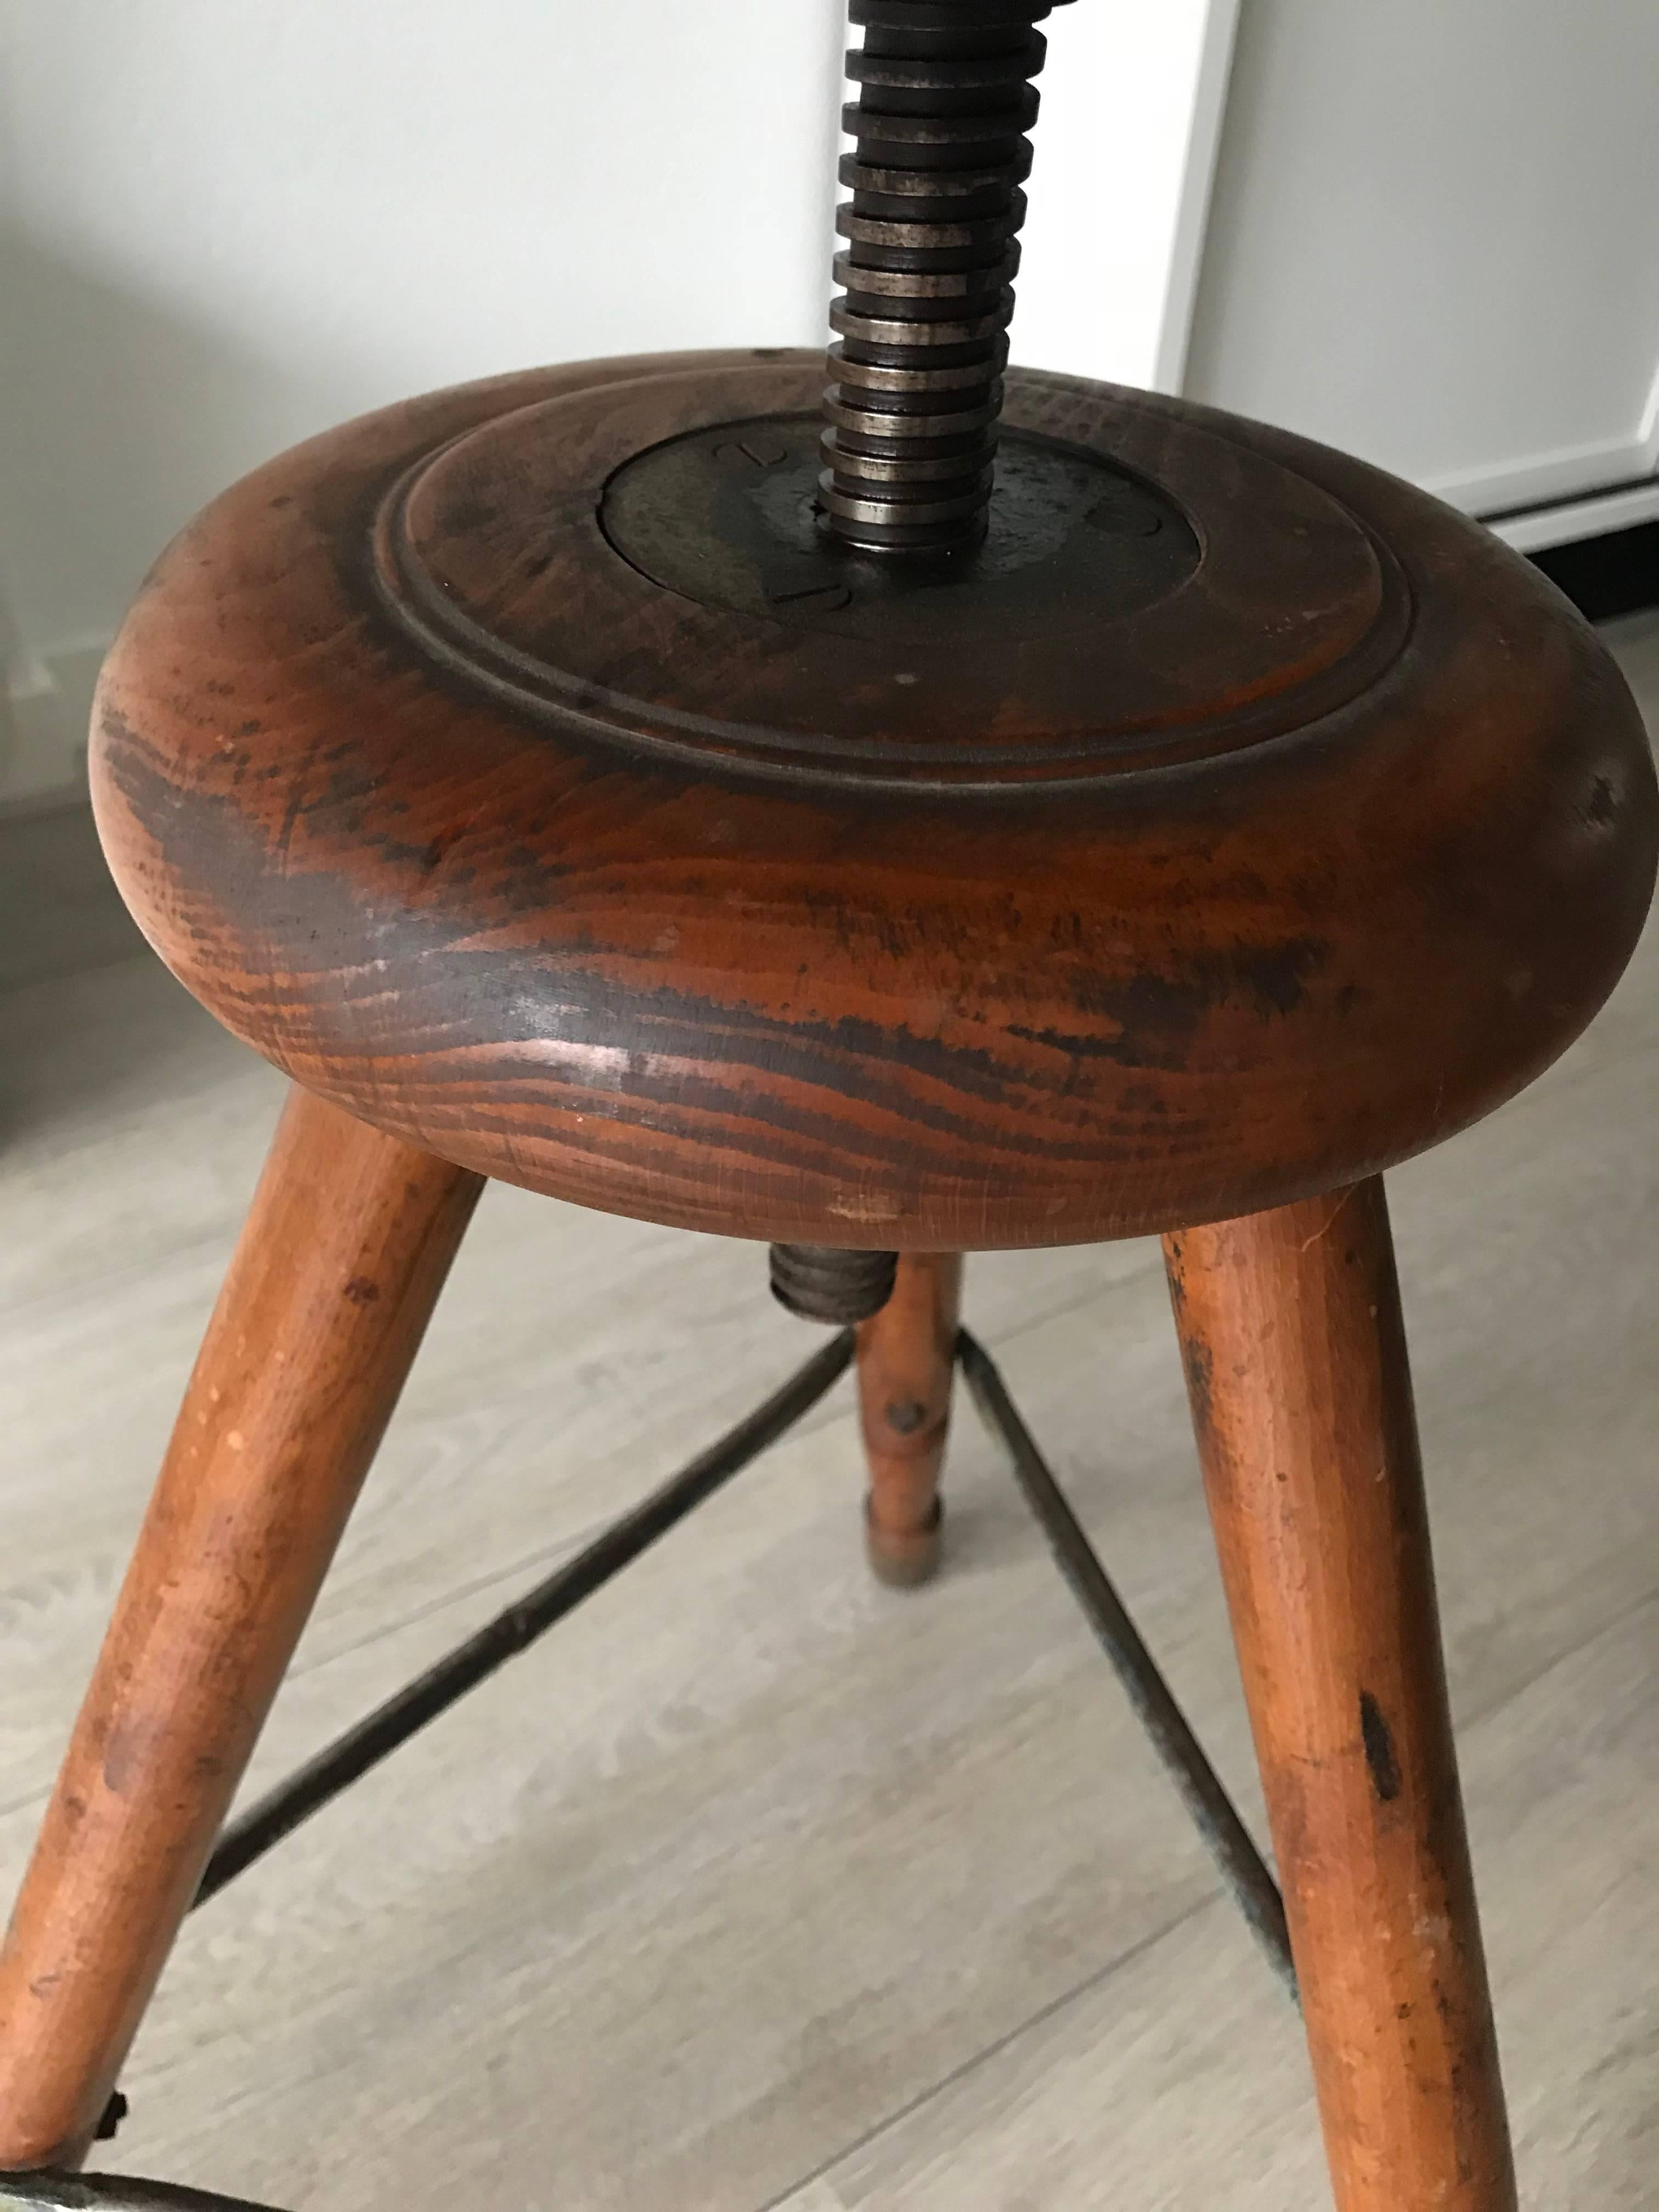 Rare Industrial Artist Studio Spindle Chair or Stool Adjustable in Height, 1920s 1